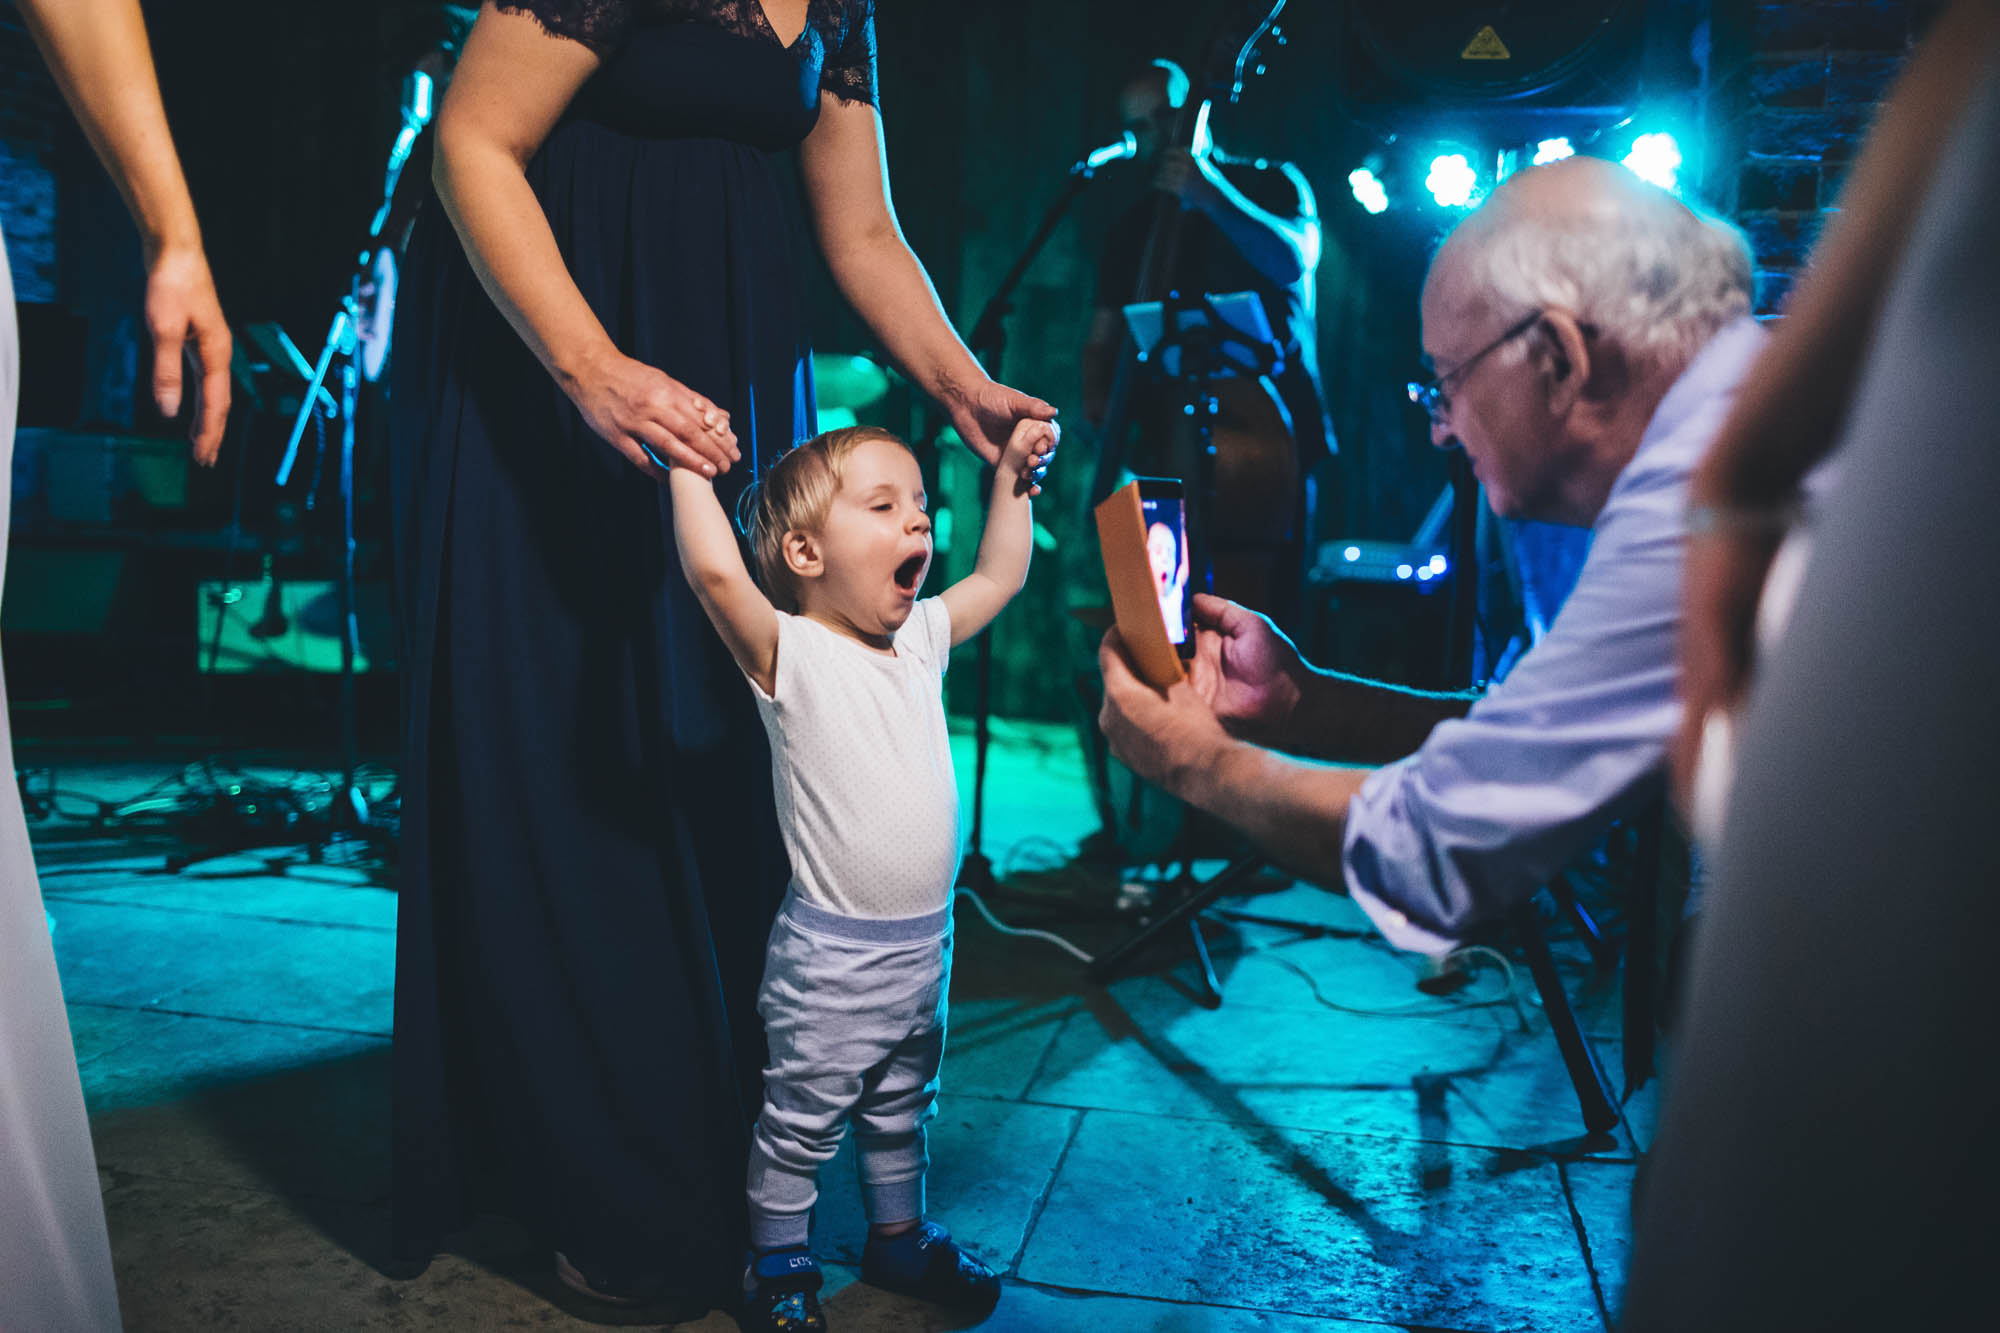 Young wedding guest yawns on the dancefloor as old man takes opportunity to get a photo of the cute moment